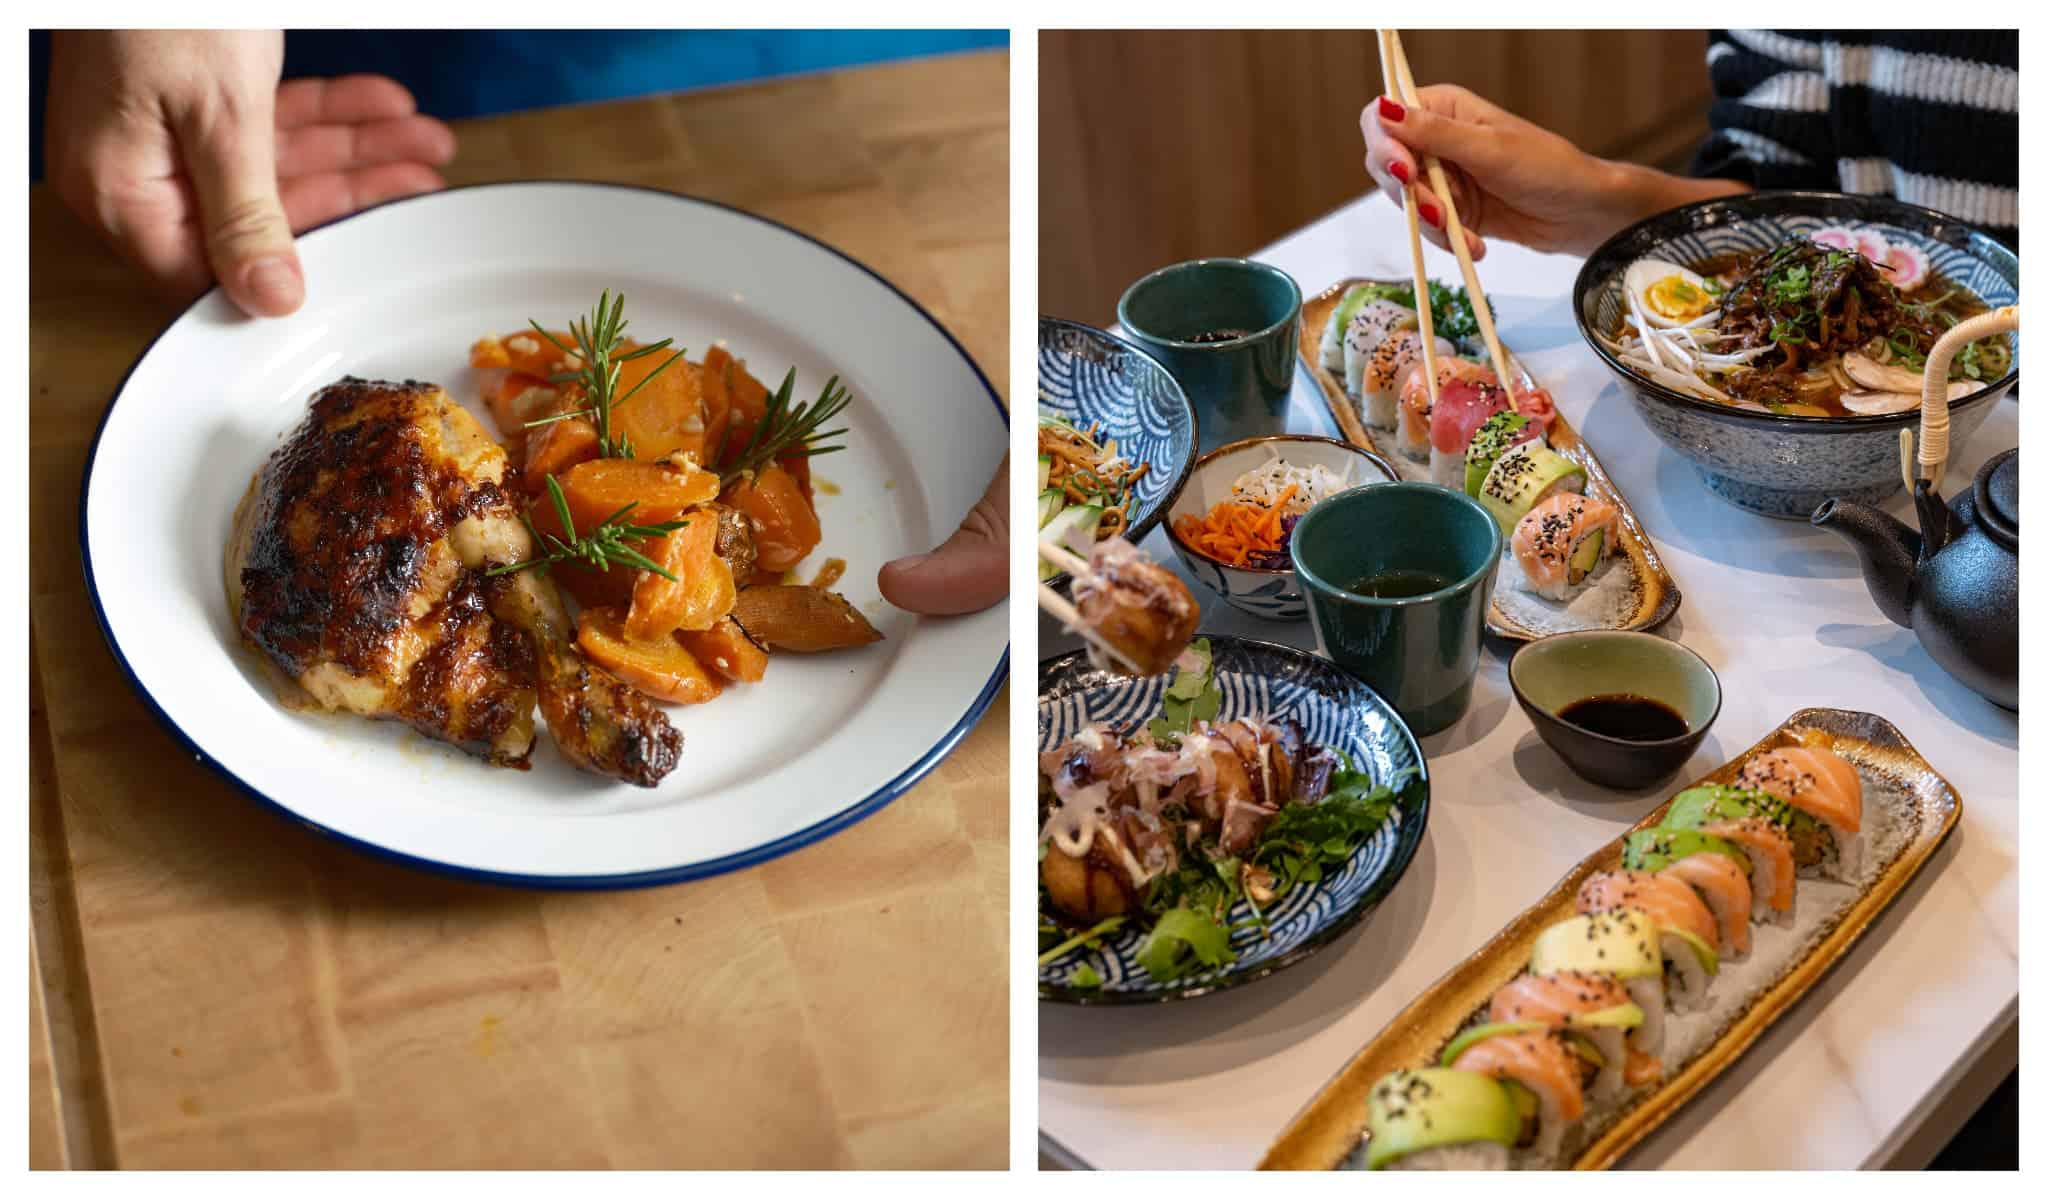 Left: food displayed at Label Broche; Right: plates of food at Rice Street 